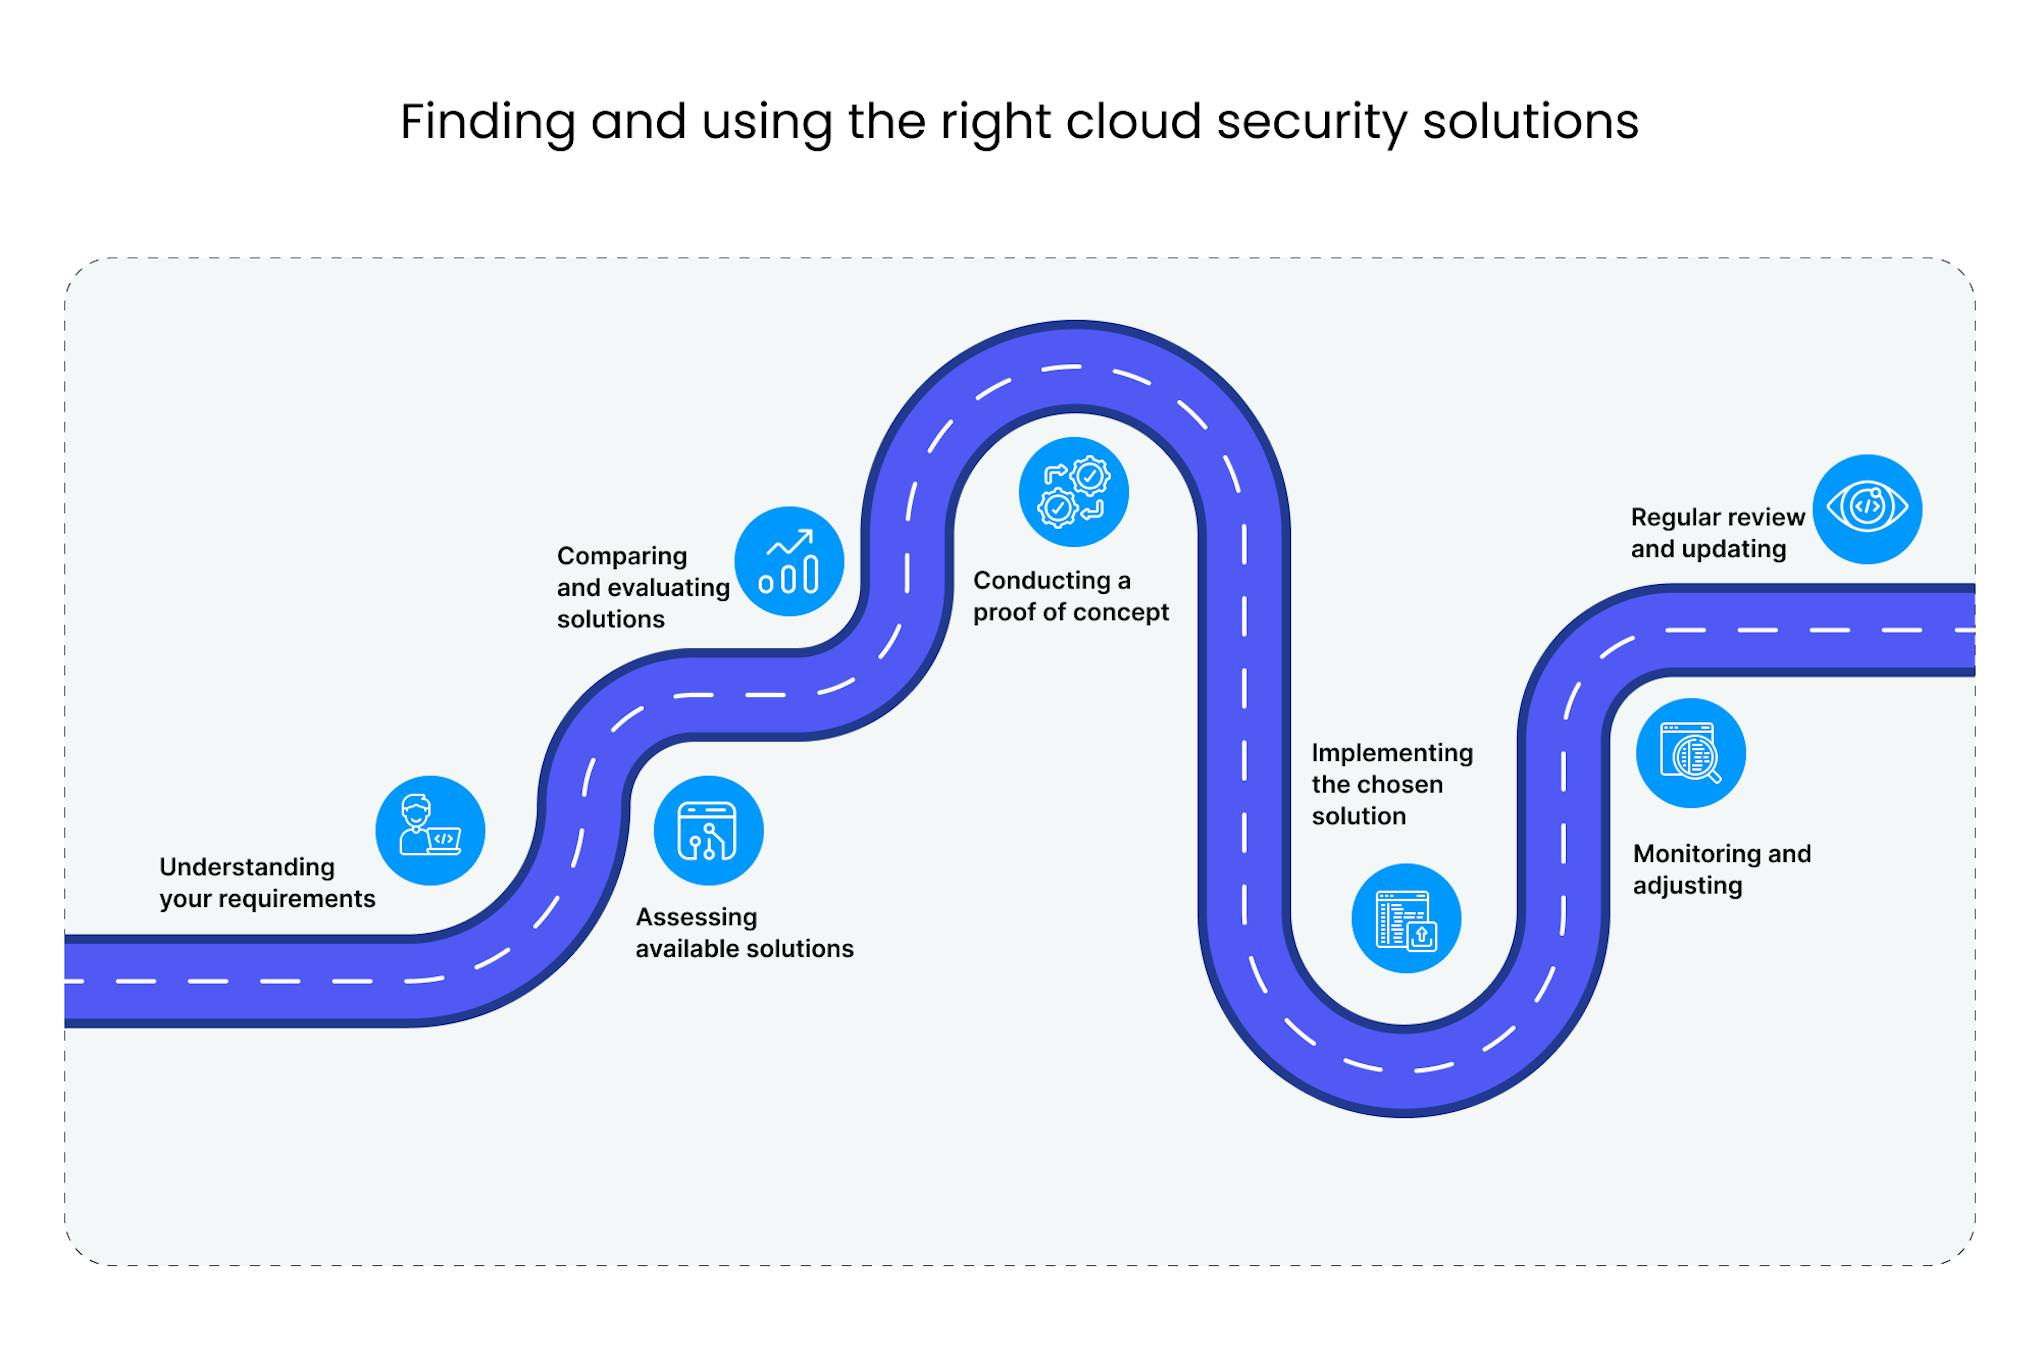 Finding and using the right cloud security solutions